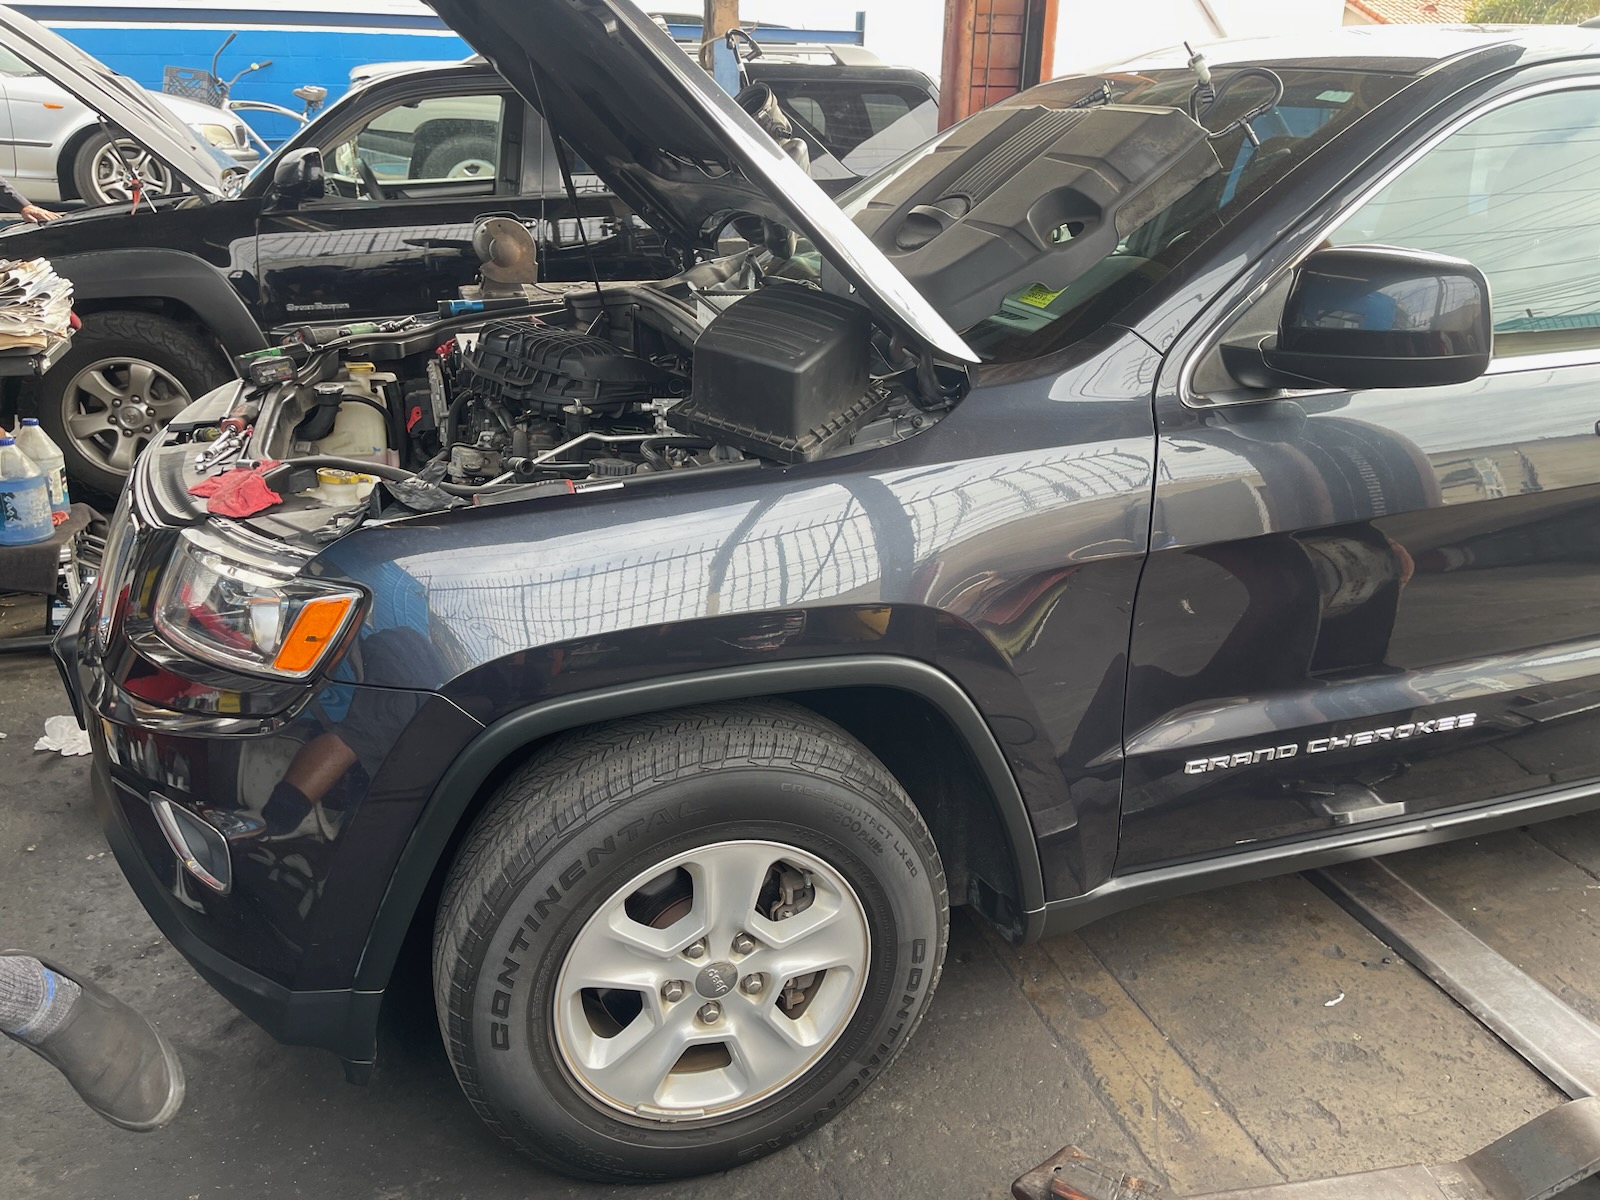 Check Engine Light On: How We Fixed a Jeep Grand Cherokee P0300 and P0302 Misfire in San Diego